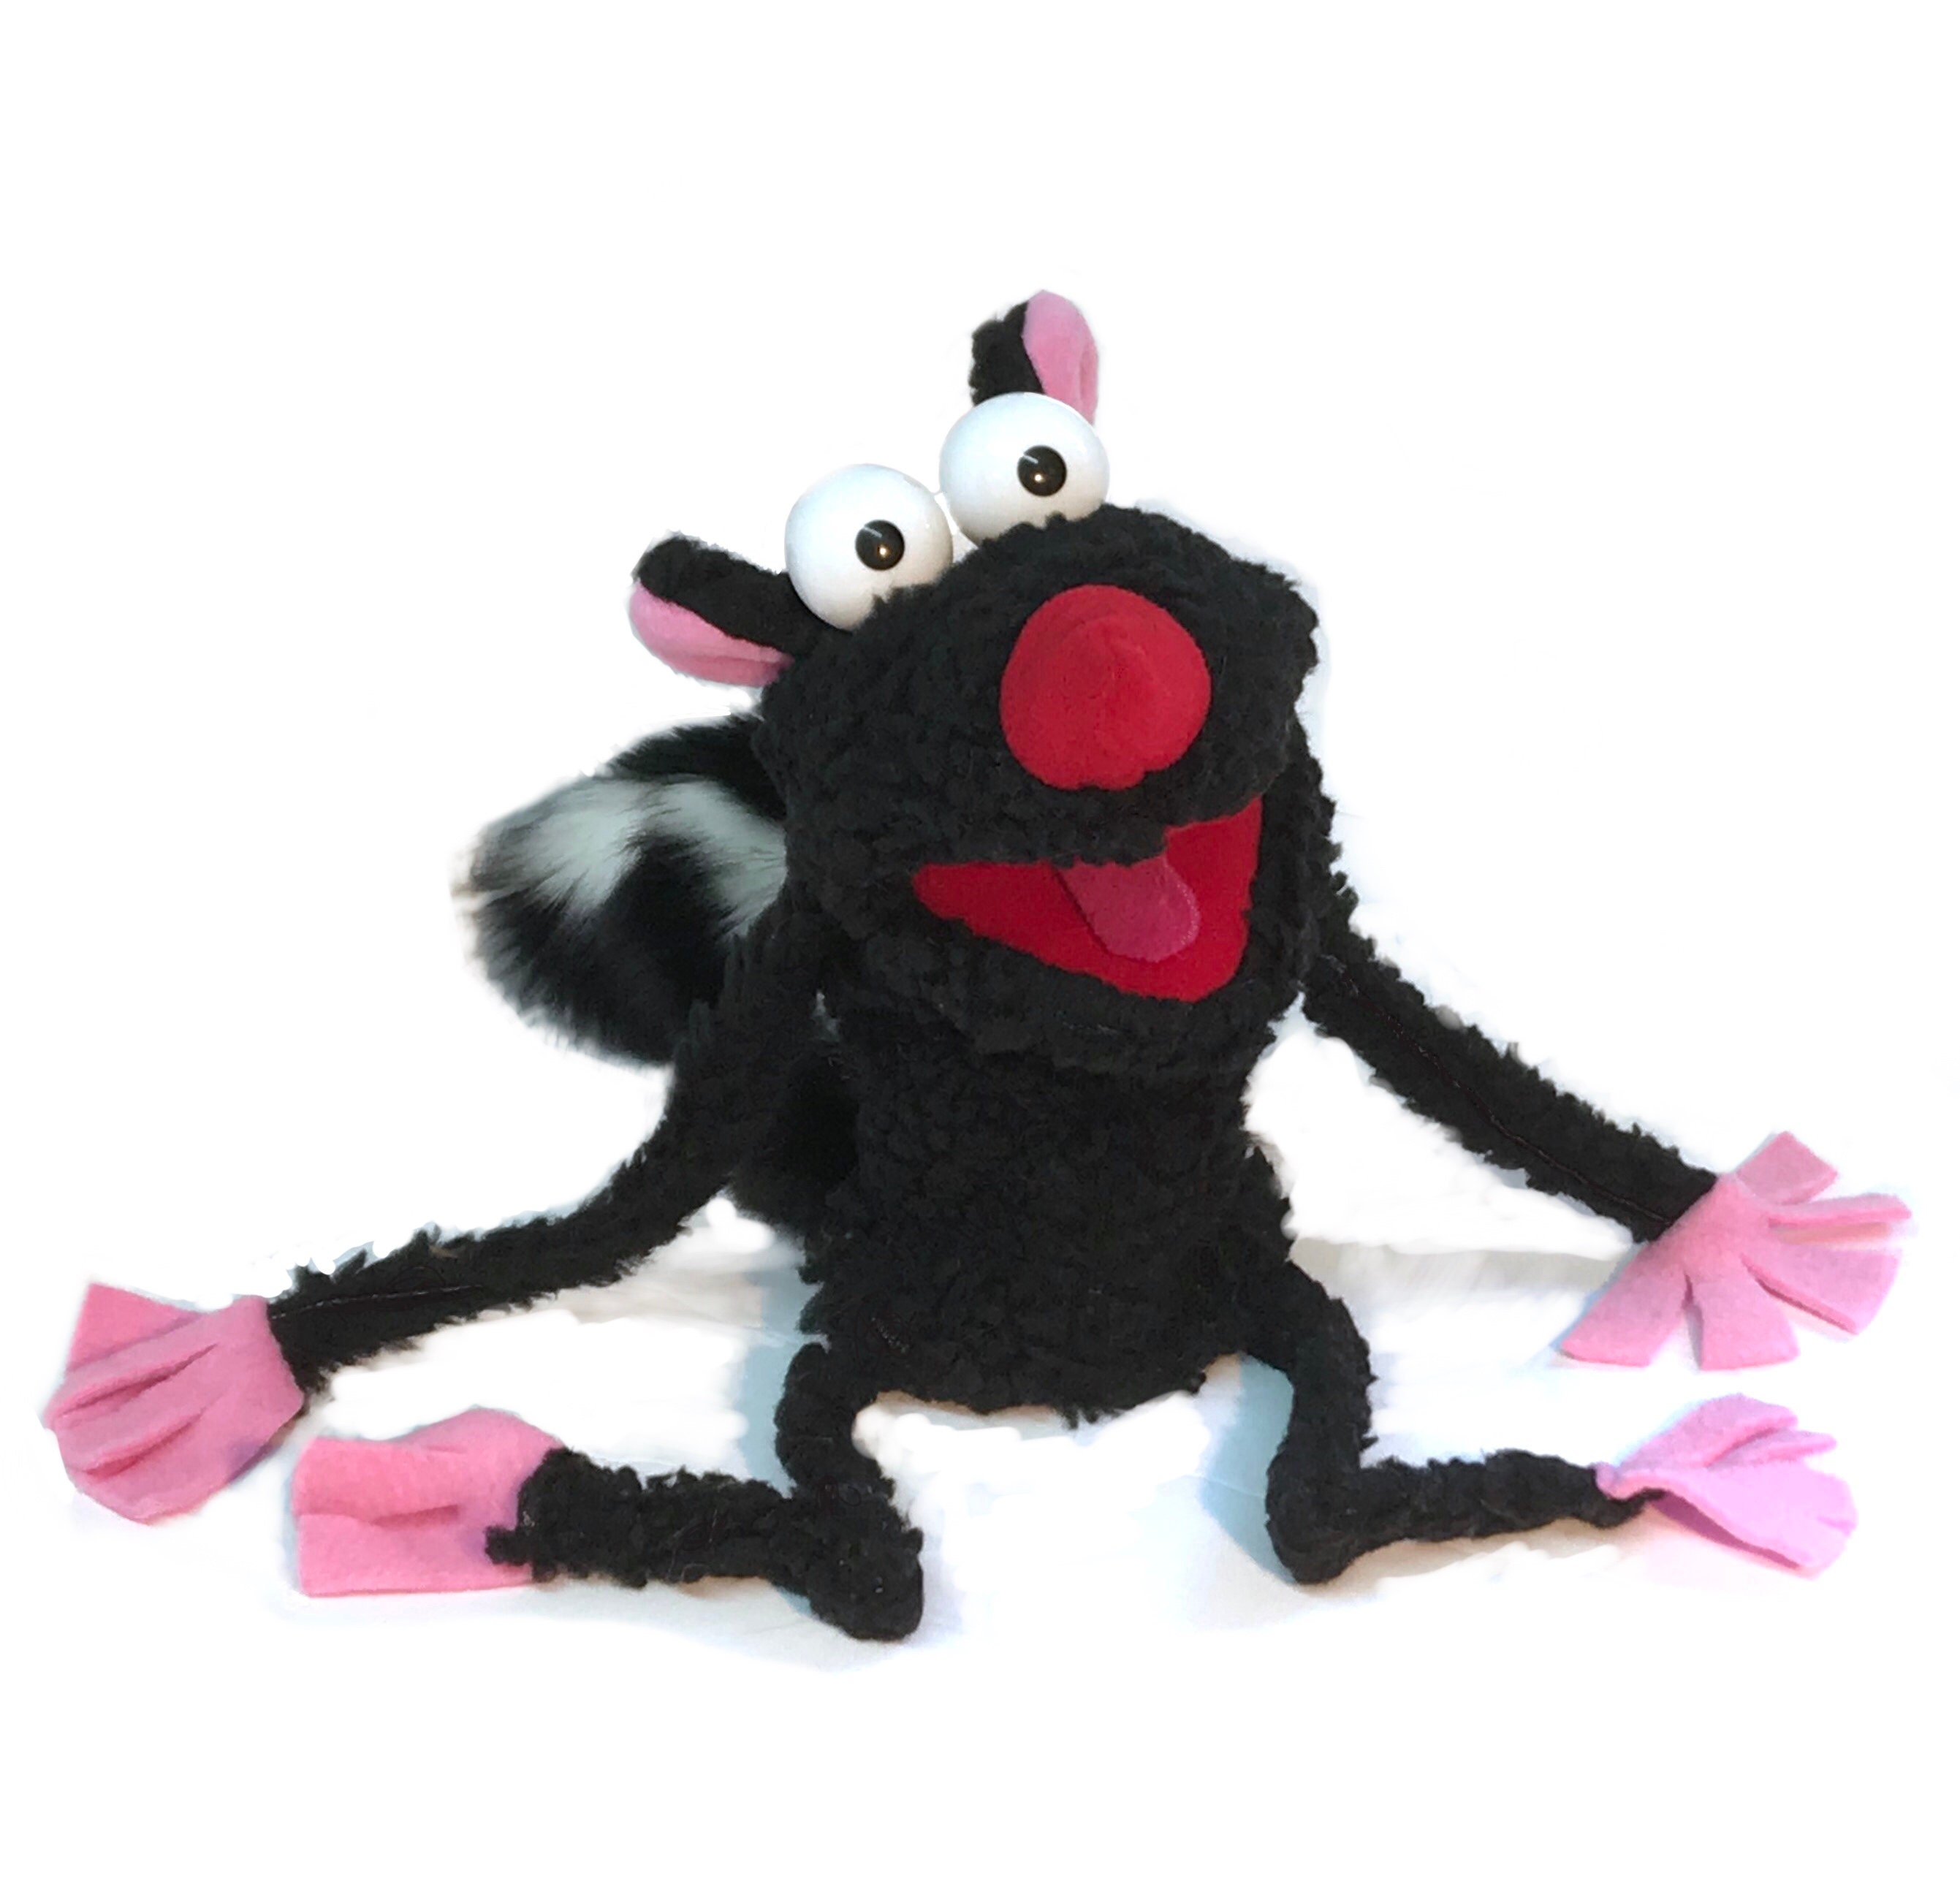 Squeaky Skunk Hand Puppet Designed and Handmade by Steven